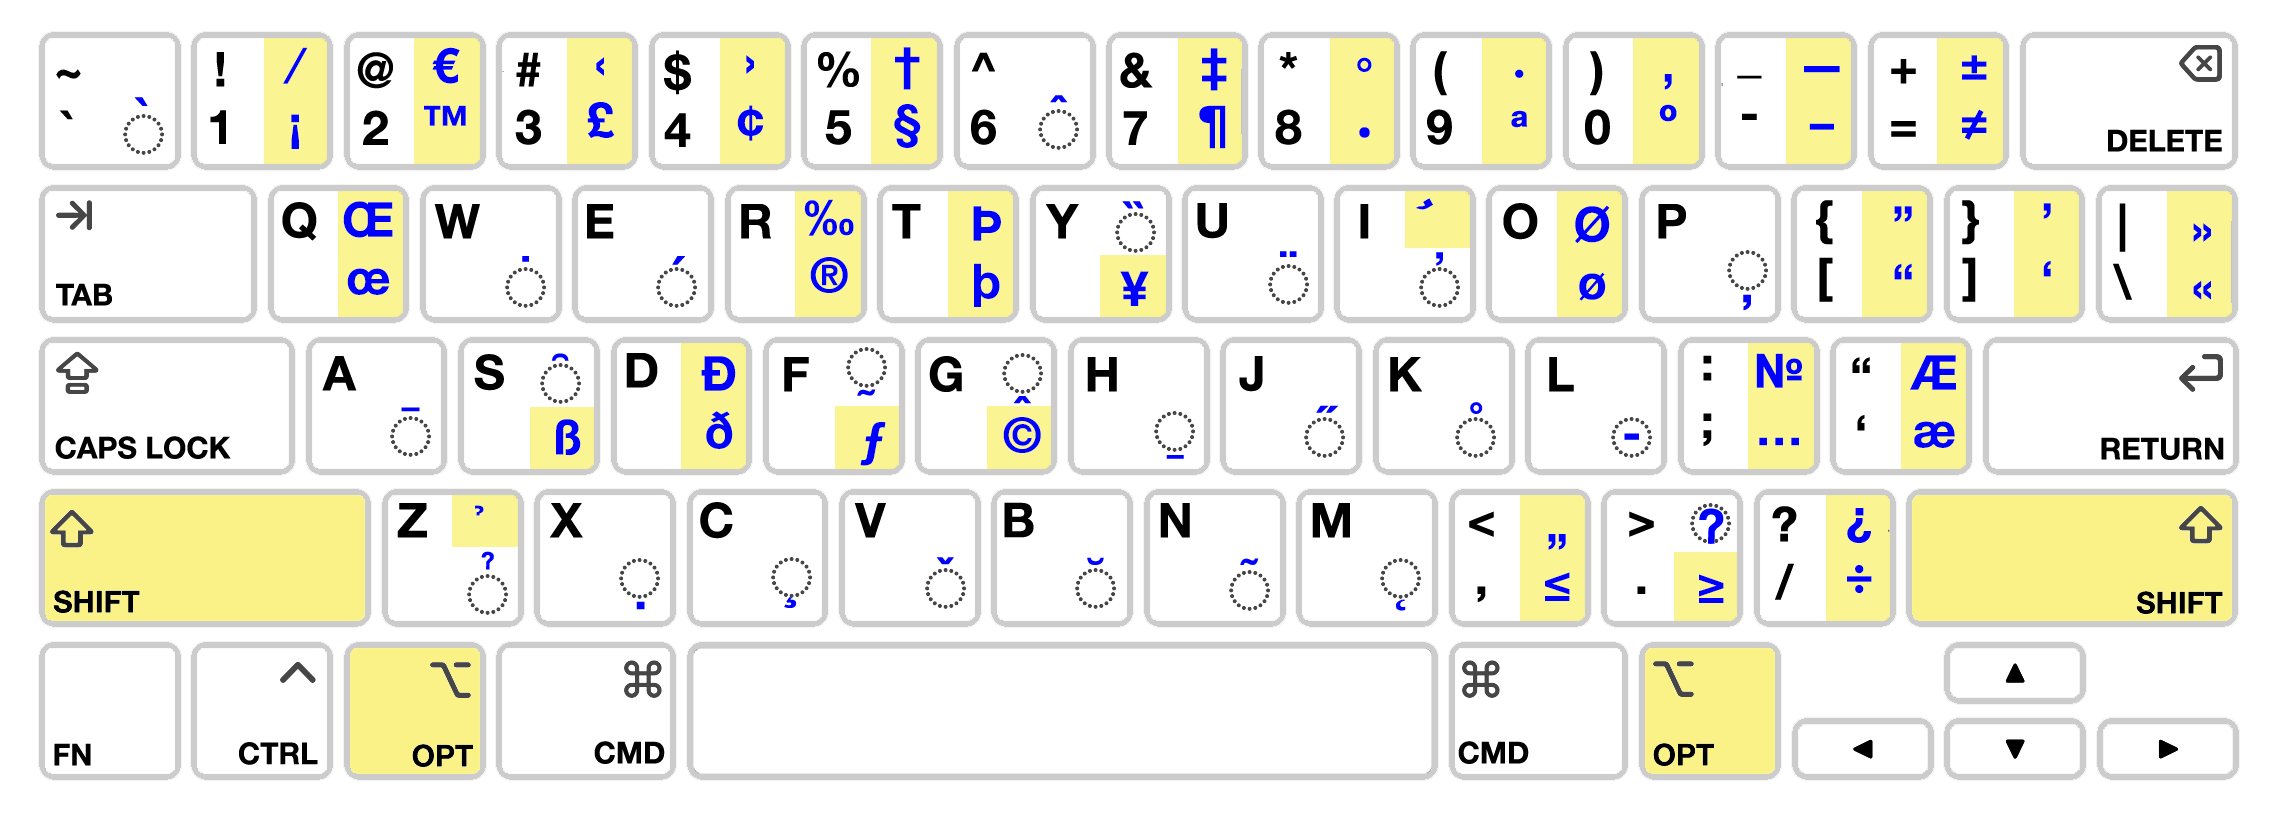 Apple Keyboard Layout With Options